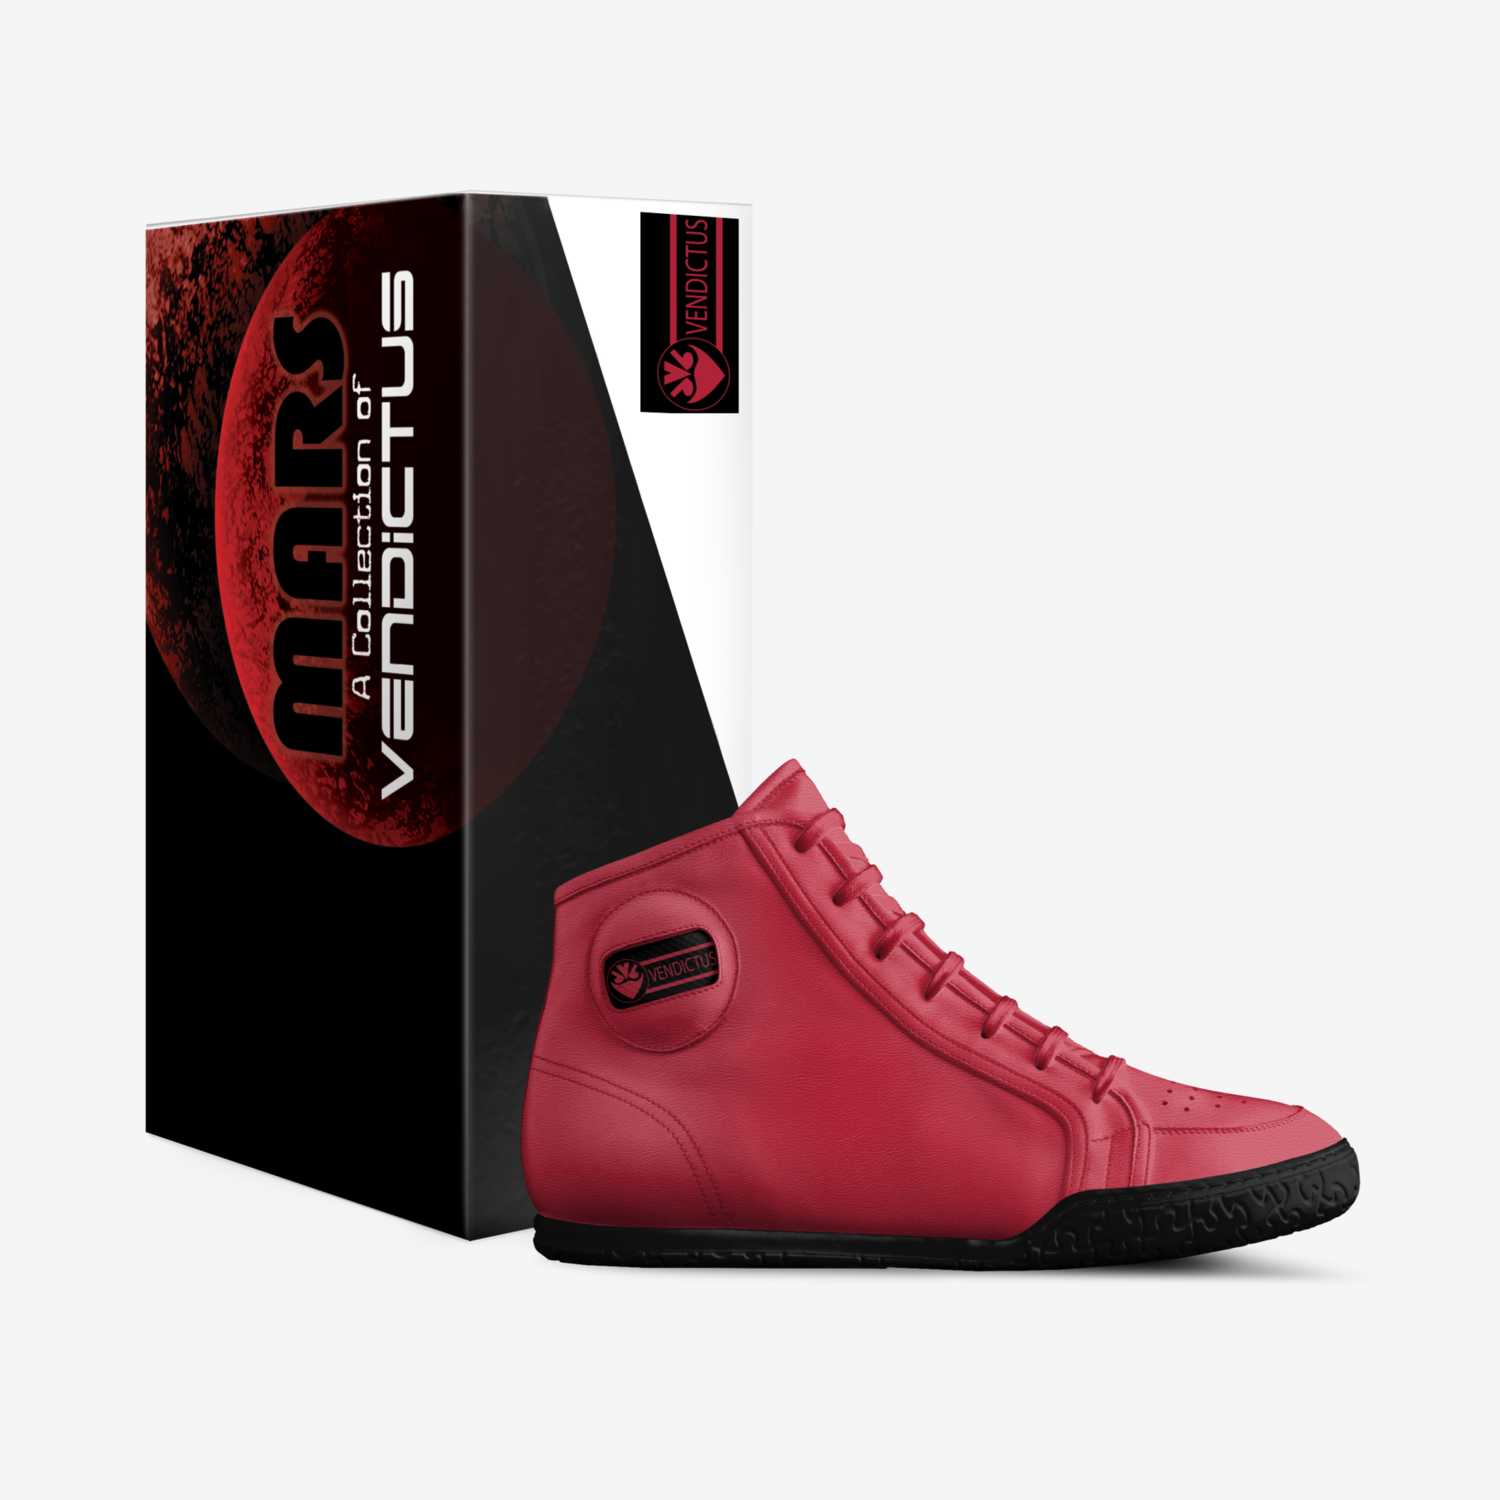 Vendictus custom made in Italy shoes by Lawrence Brooks | Box view